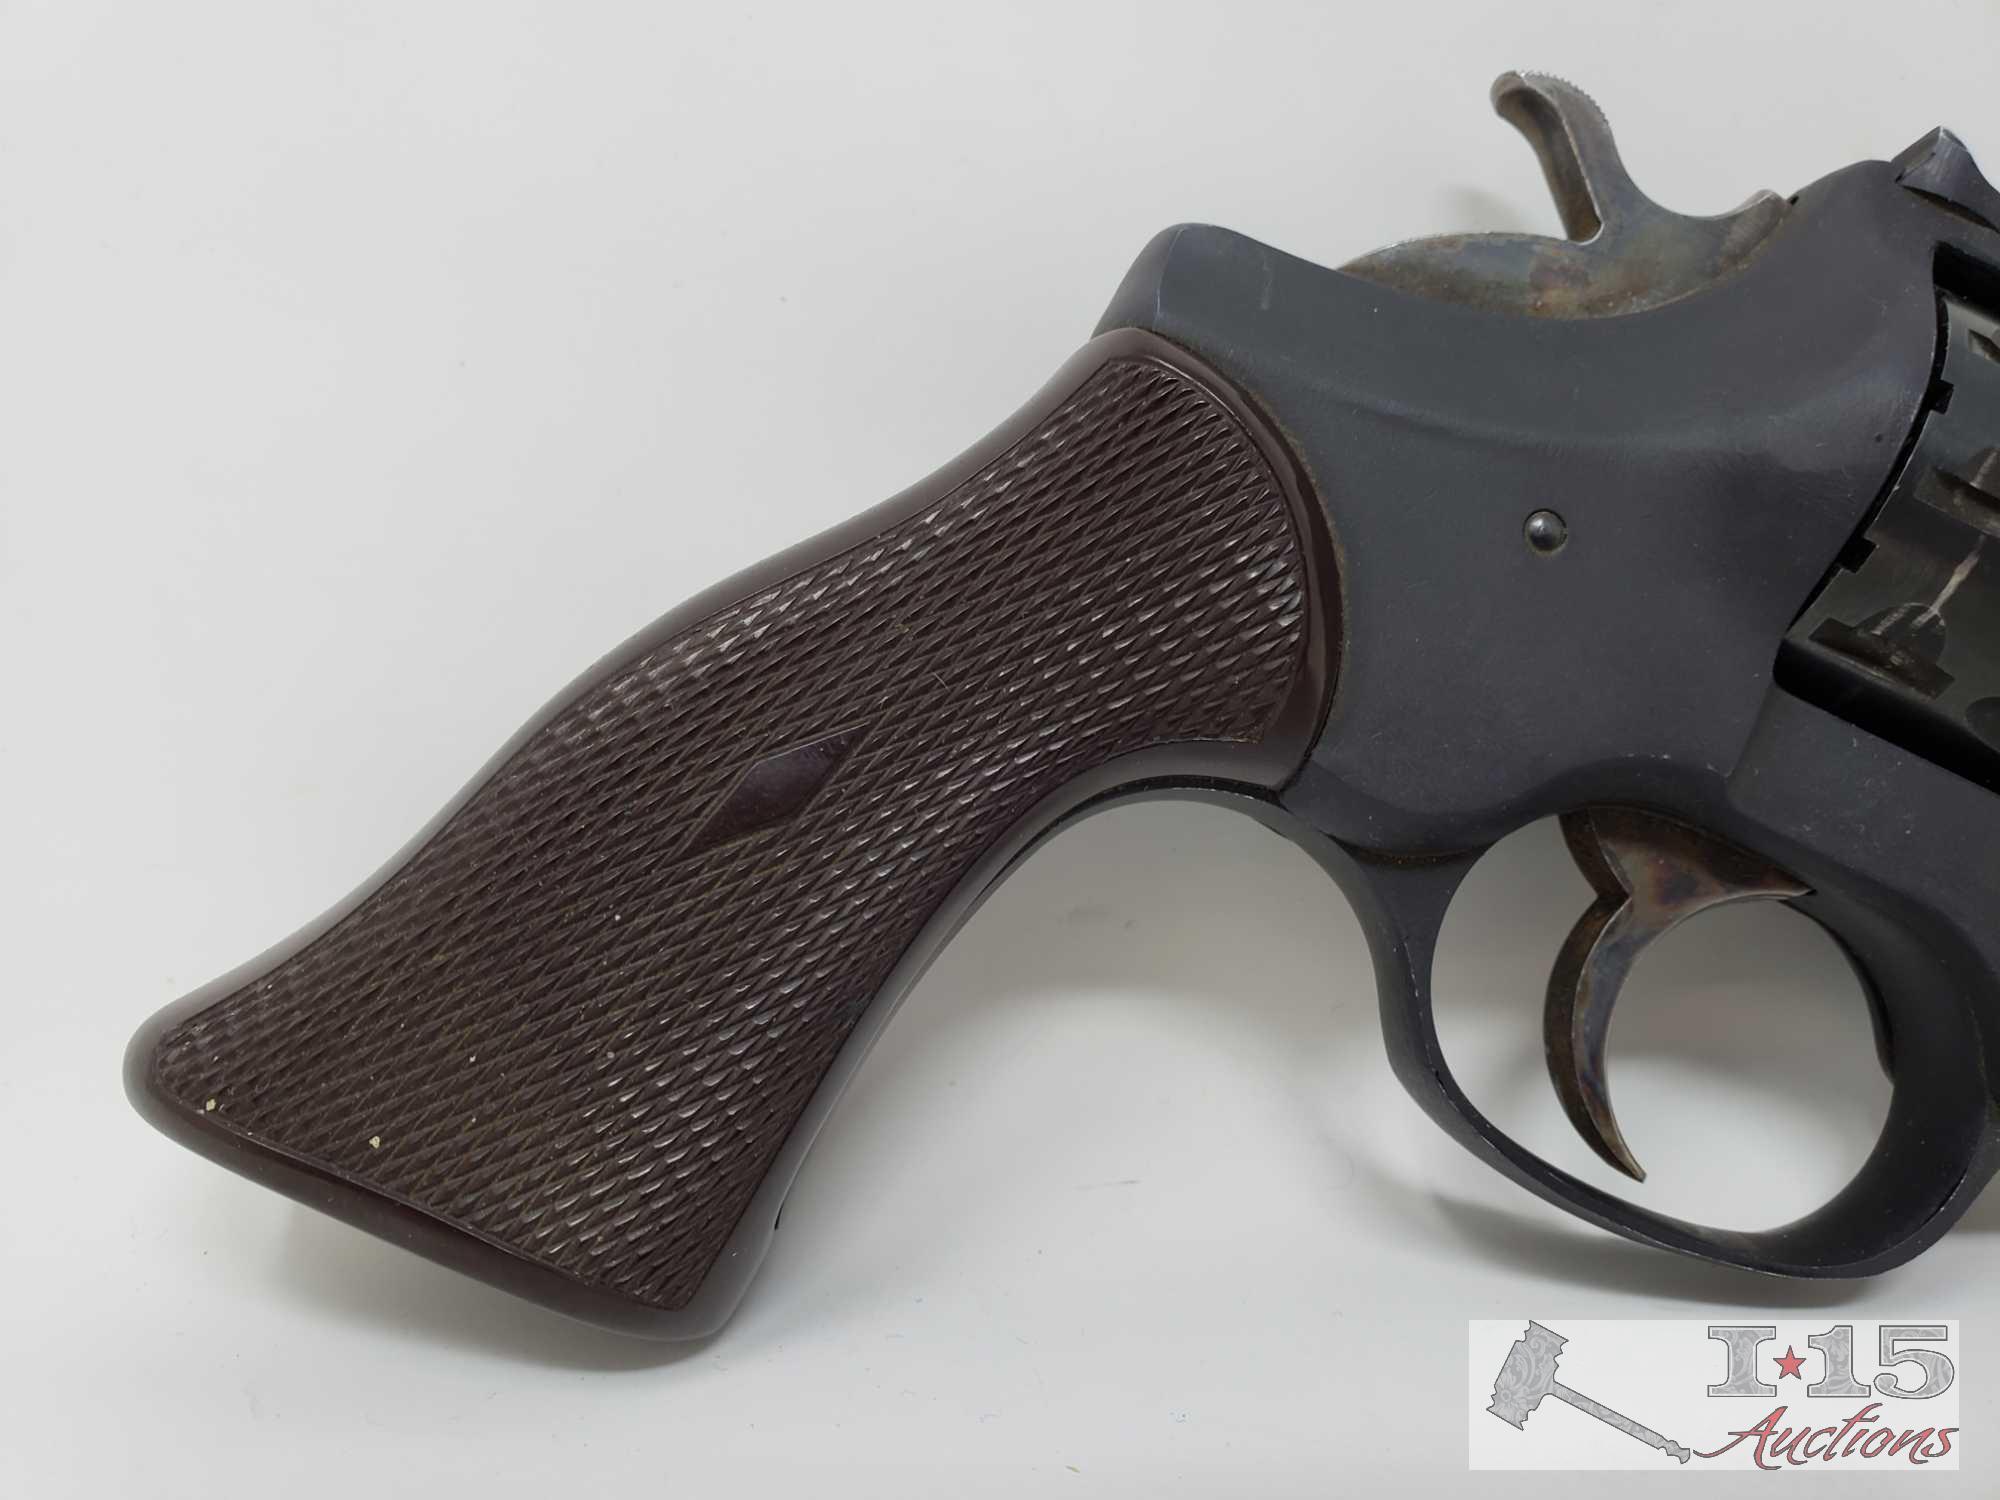 HI-Standard R-100 .22 Cal Revolver with Holster